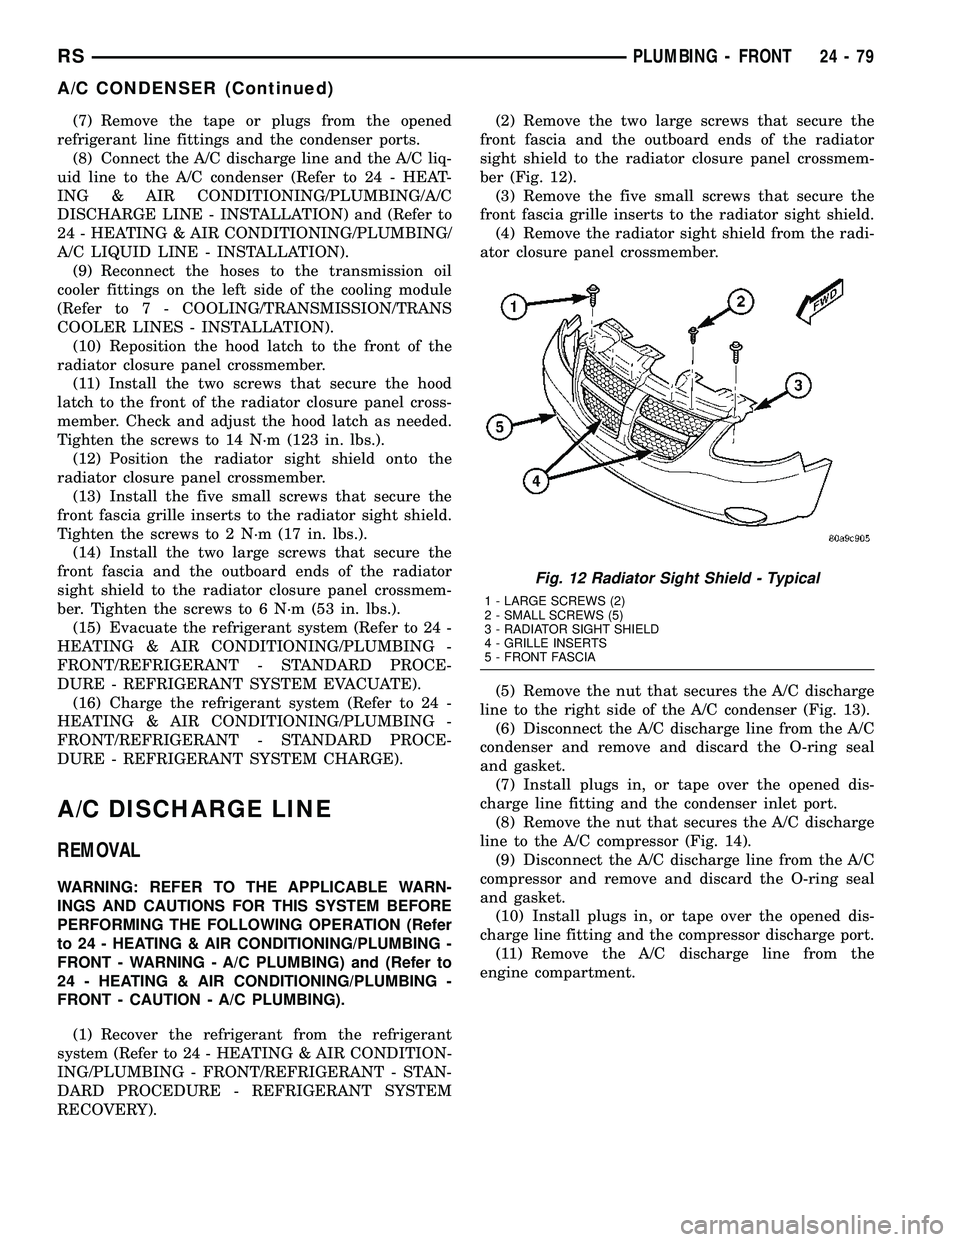 CHRYSLER VOYAGER 2005  Service Manual (7) Remove the tape or plugs from the opened
refrigerant line fittings and the condenser ports.
(8) Connect the A/C discharge line and the A/C liq-
uid line to the A/C condenser (Refer to 24 - HEAT-
I